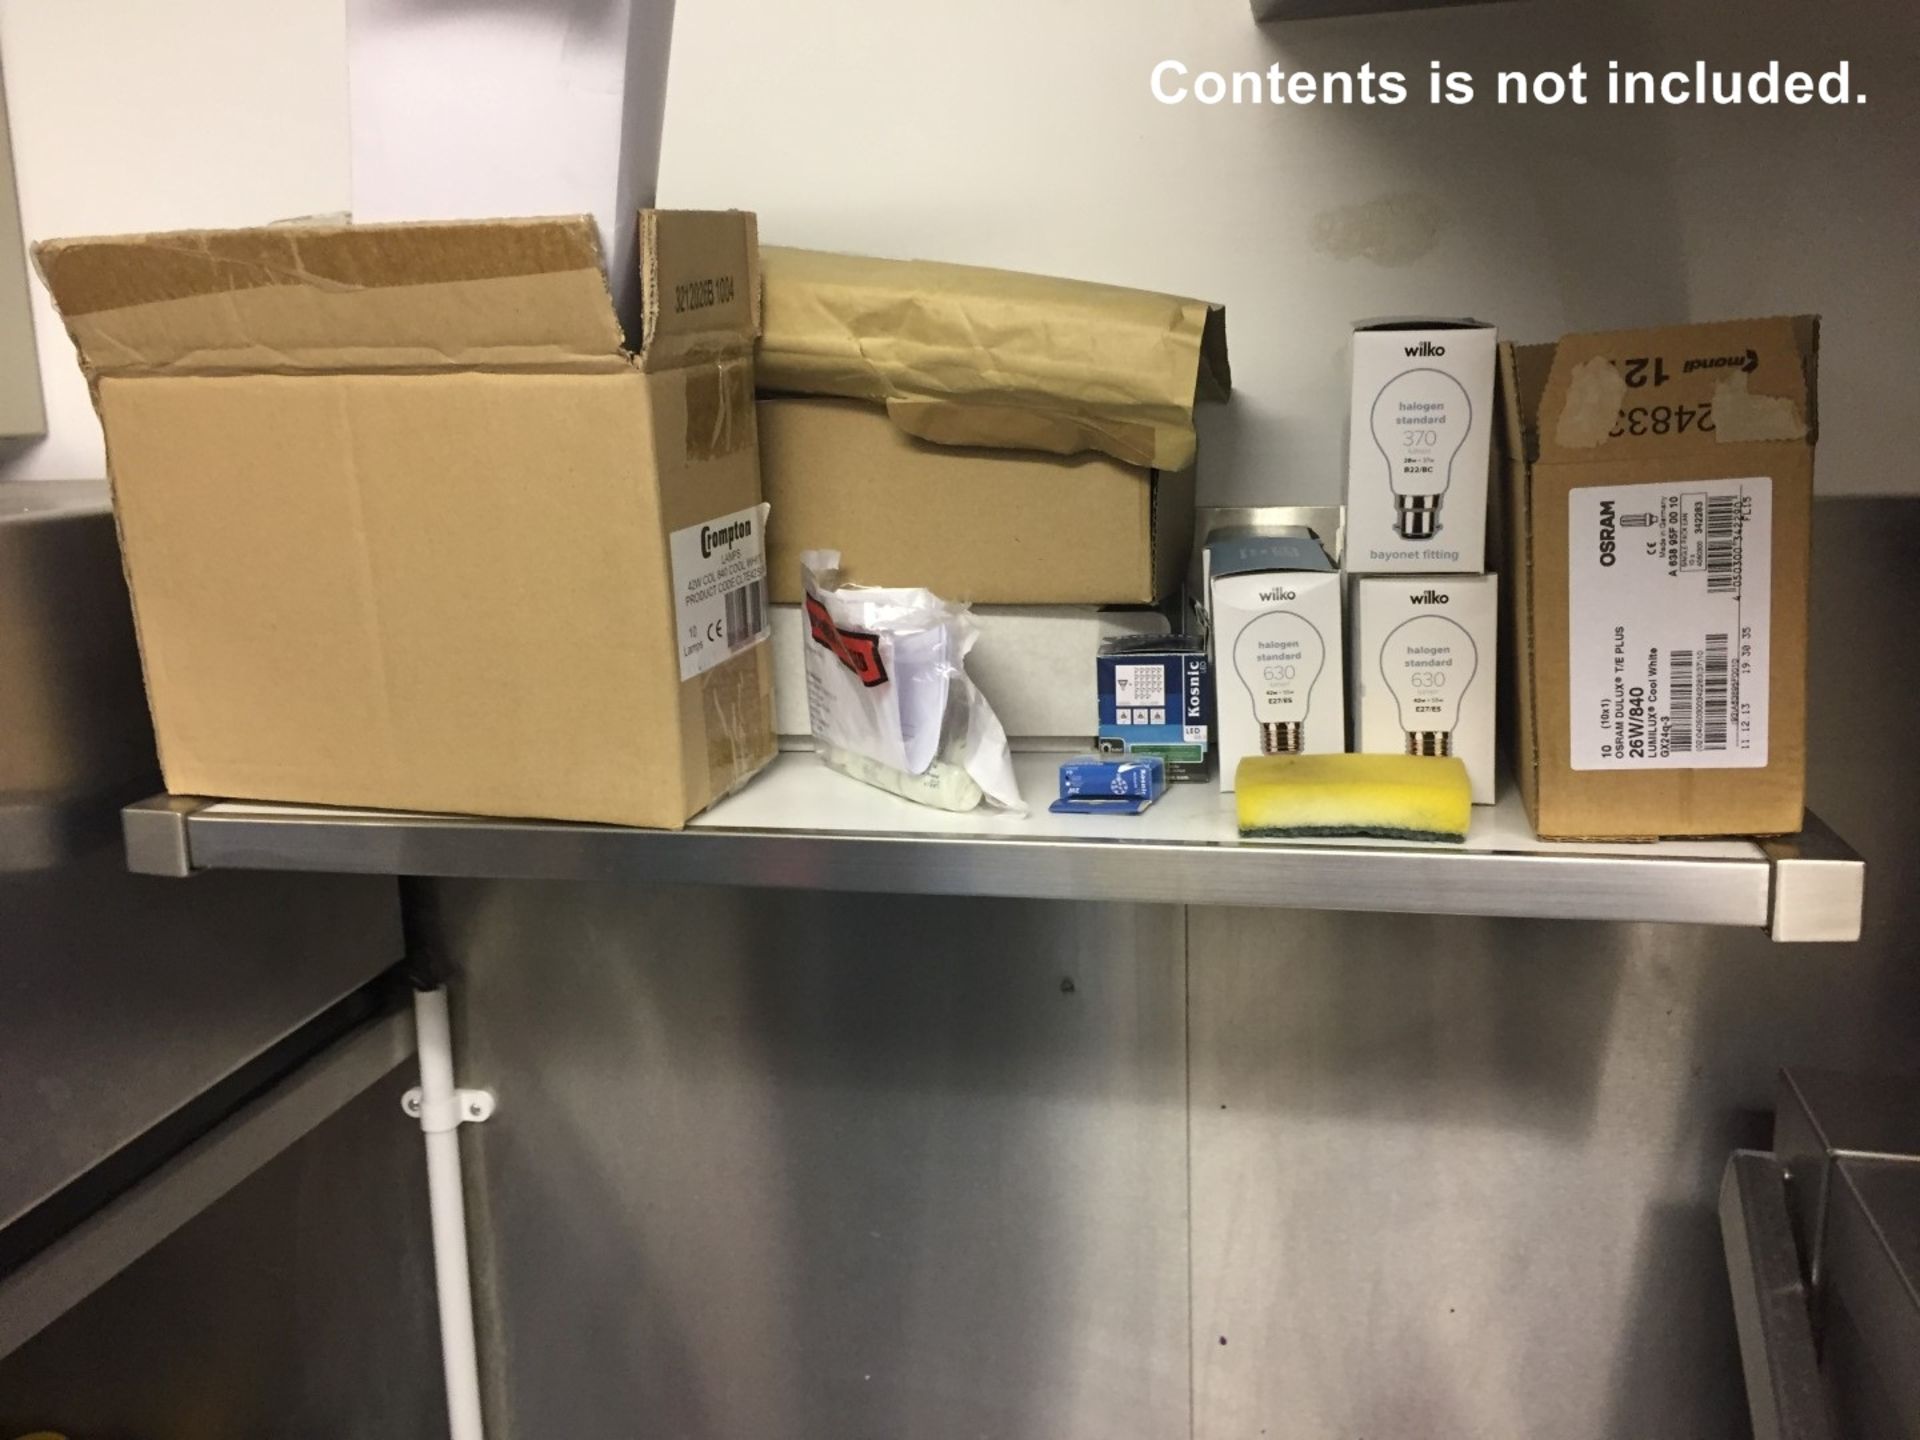 5 x Assorted Stainless Steel Shelves And 1 x Undercounter Cupboard - 6 Items In Total - Various - Image 5 of 5